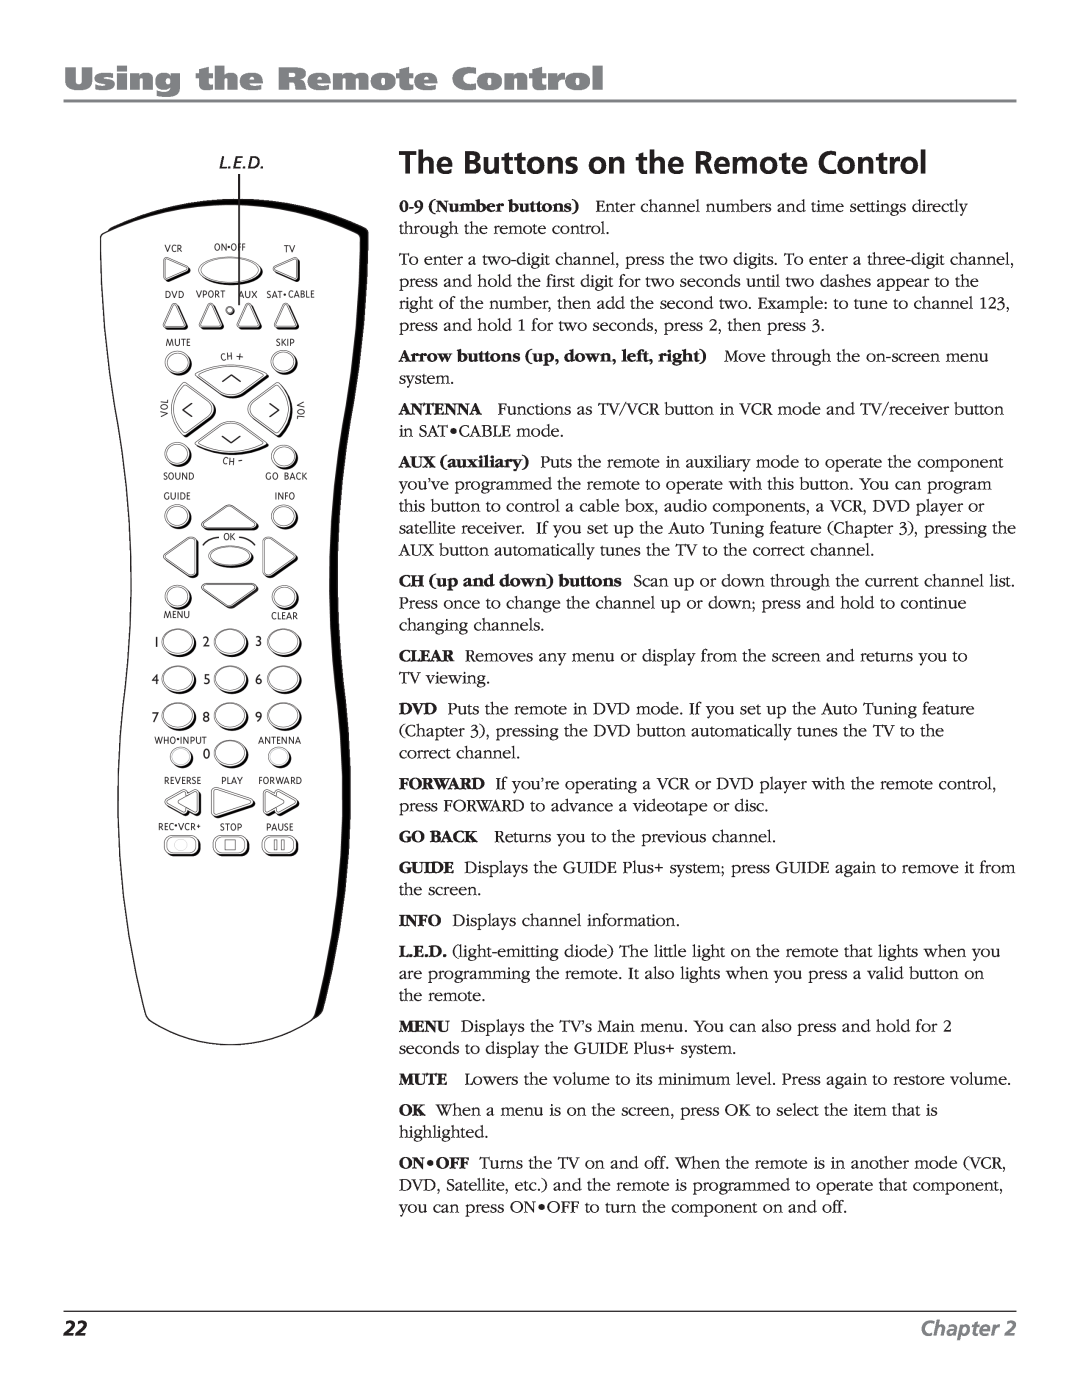 RCA MR68TF700 manual Using the Remote Control, The Buttons on the Remote Control, Chapter, L.E.D 